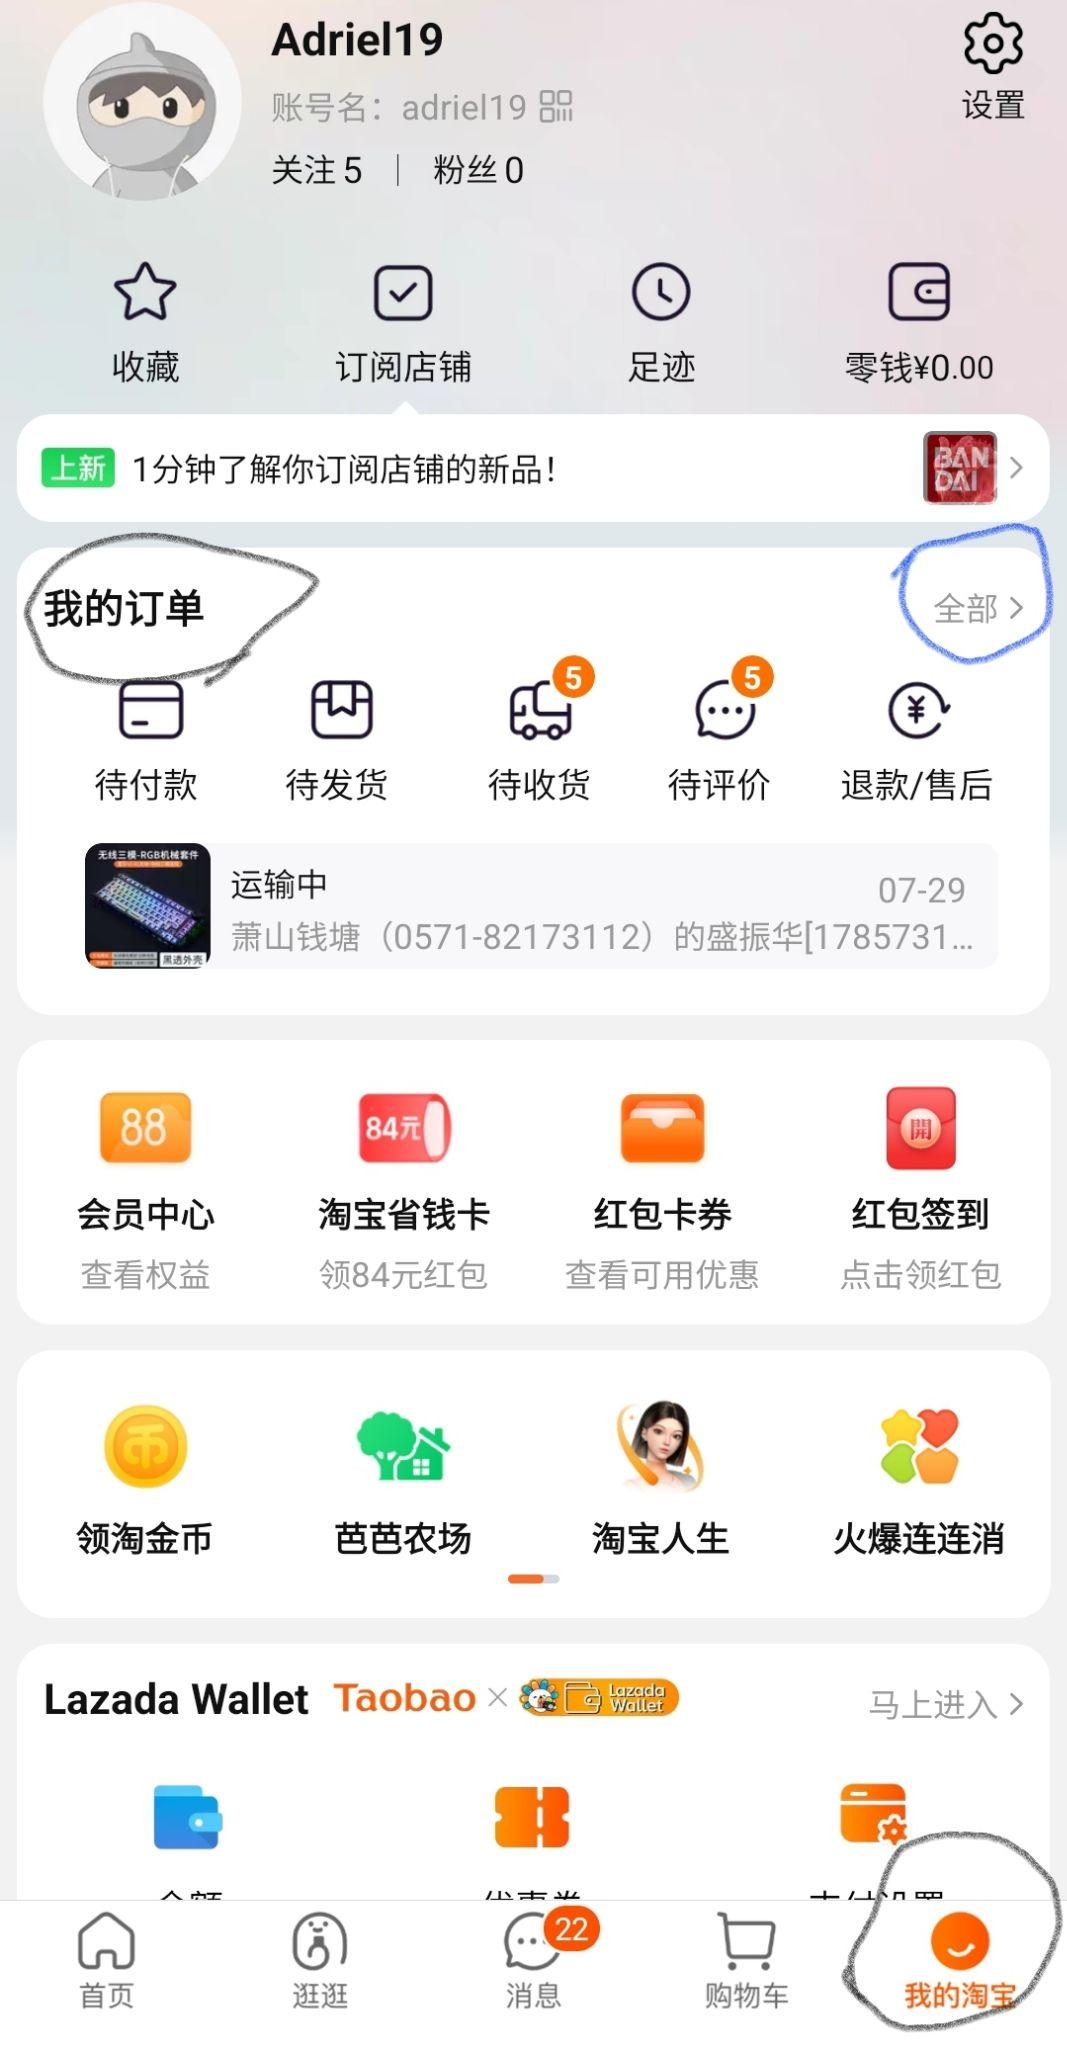 Confirm your received order on mobile to collect Taobao coins